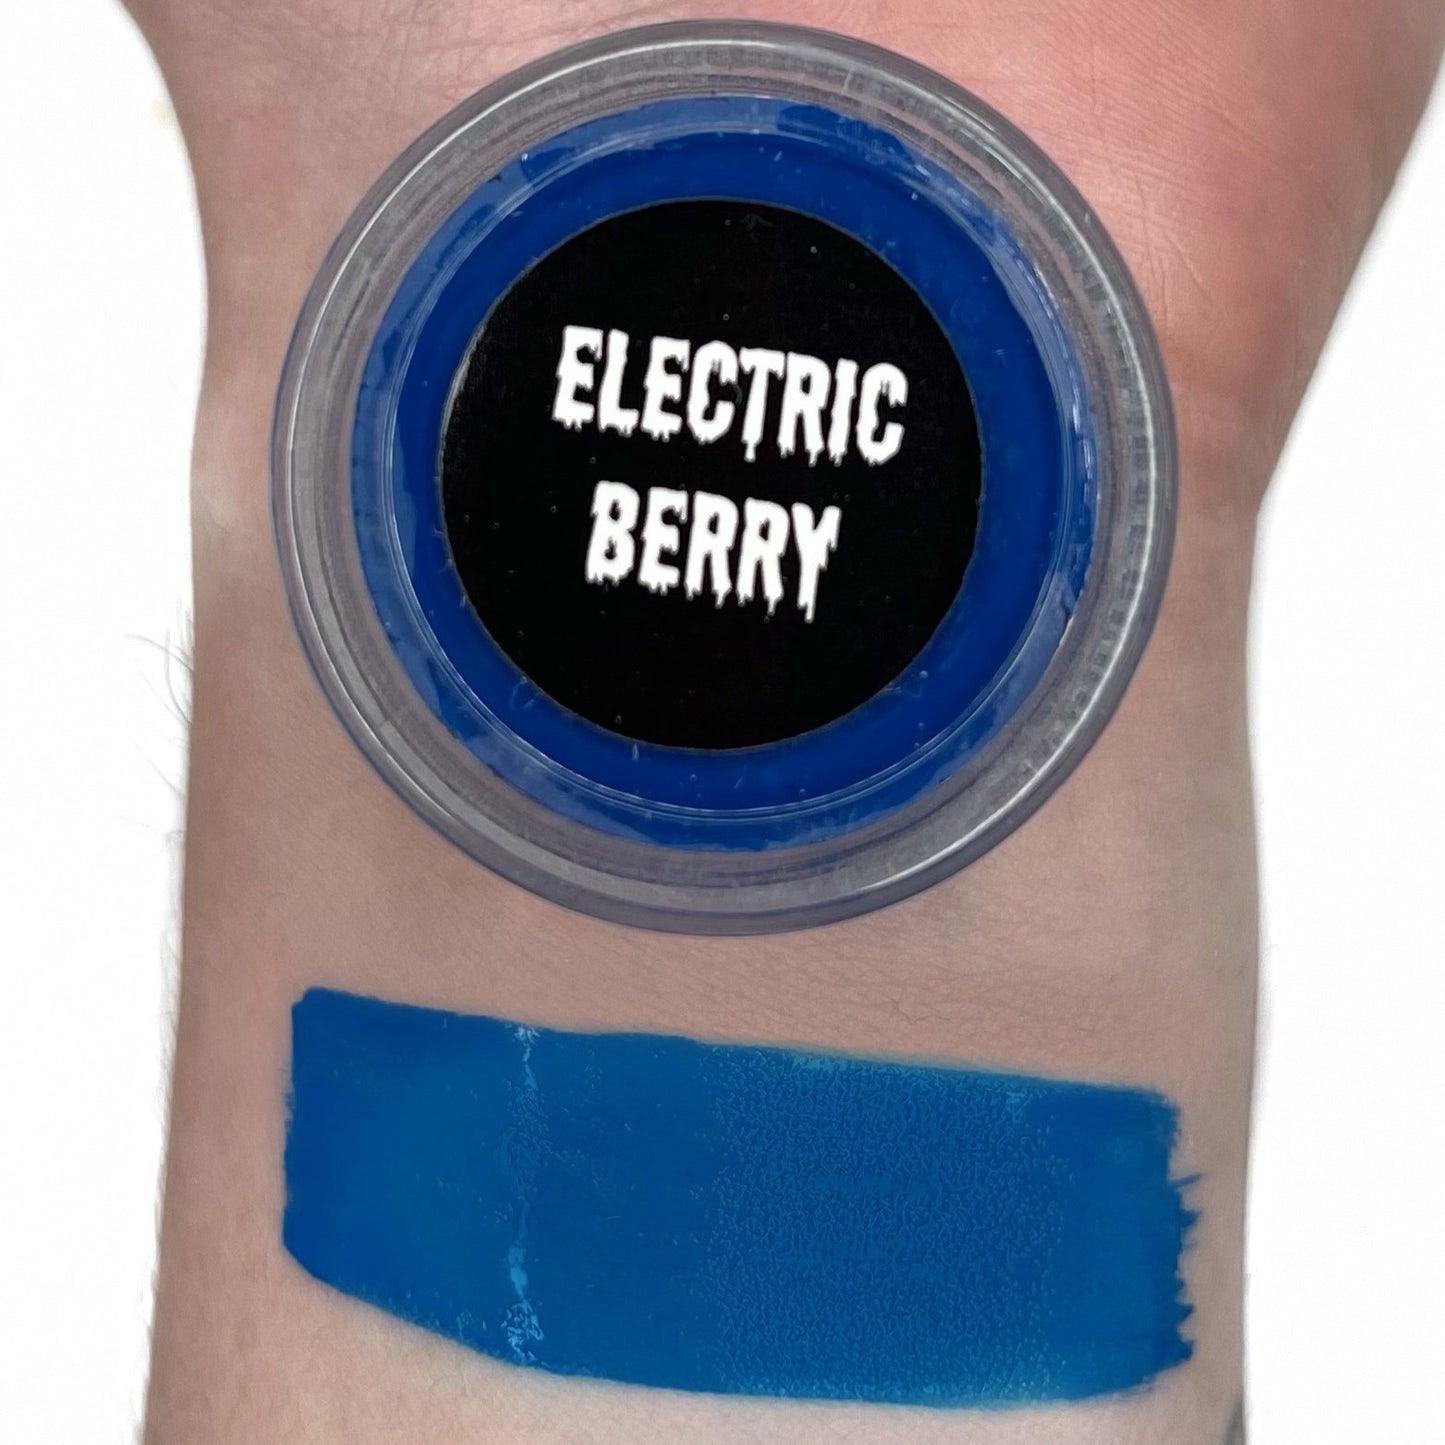 "Electric Berry" Hydro Liner